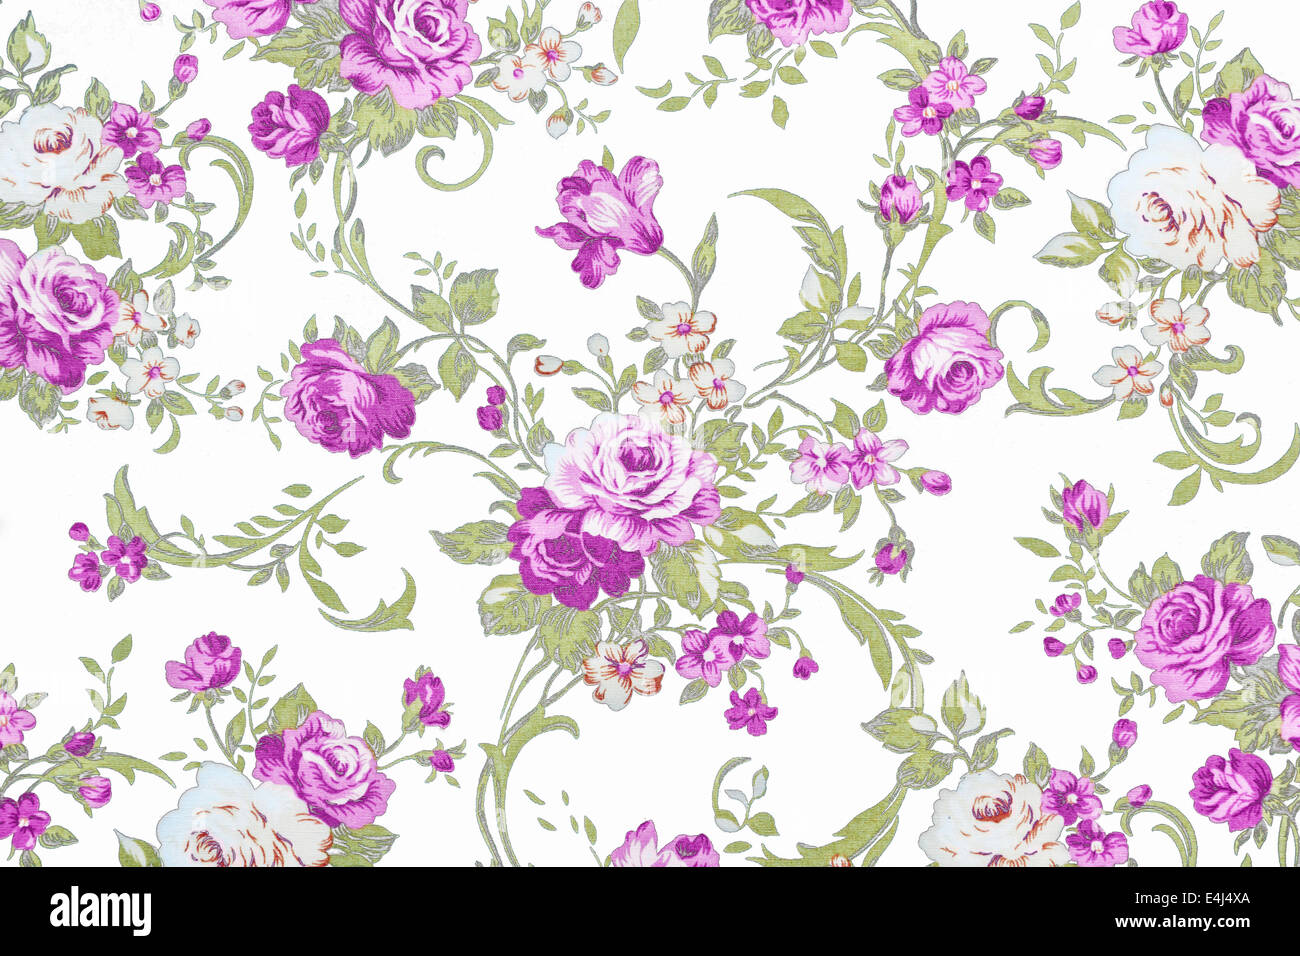 purple rose on white fabric background, Fragment of colorful retro tapestry textile pattern with floral ornament useful as backg Stock Photo